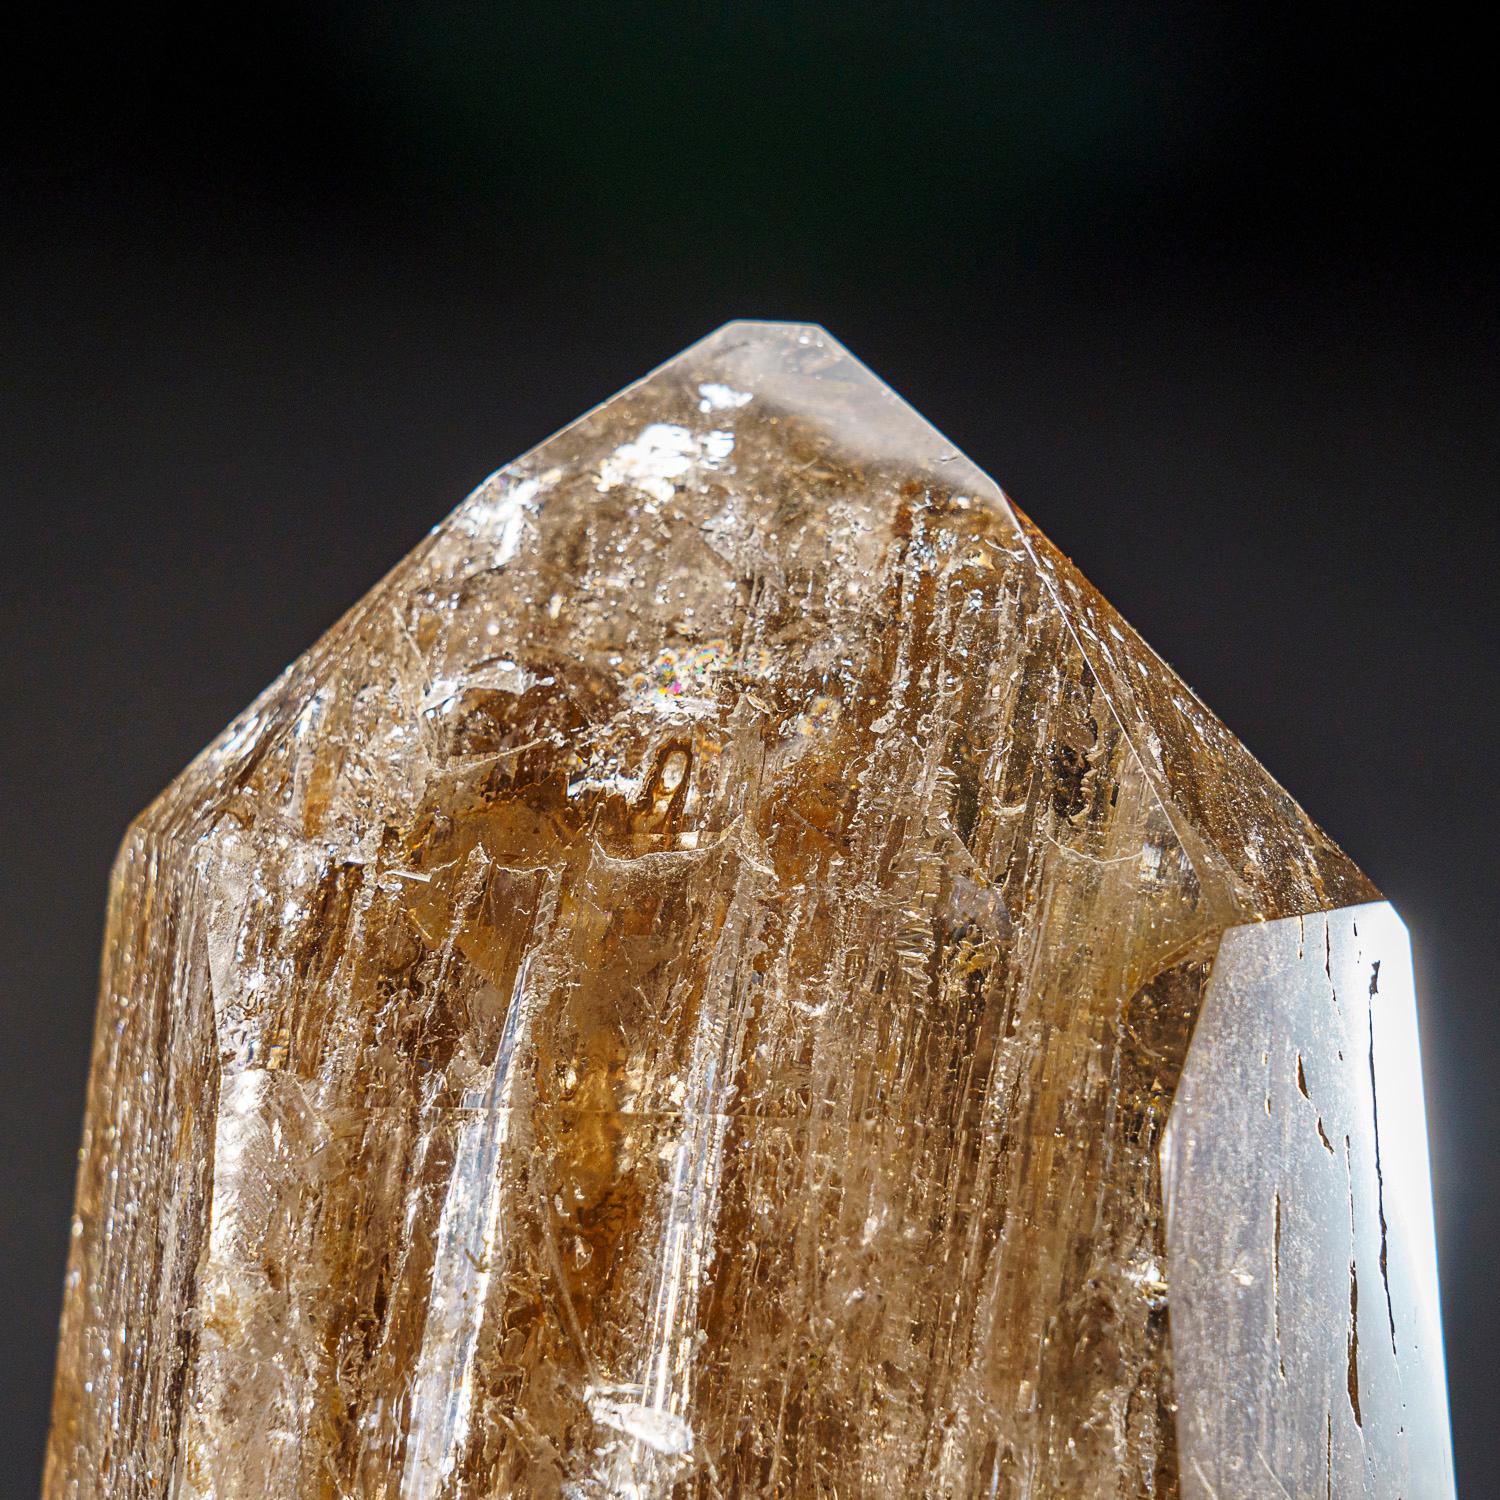 This high-quality crystal is a rare find from Brazil. The large, transparent smoky quartz showcases included water bubbles from its formation, making it an intriguing specimen. With a beautiful smoky hue, this crystal is mainly transparent with some